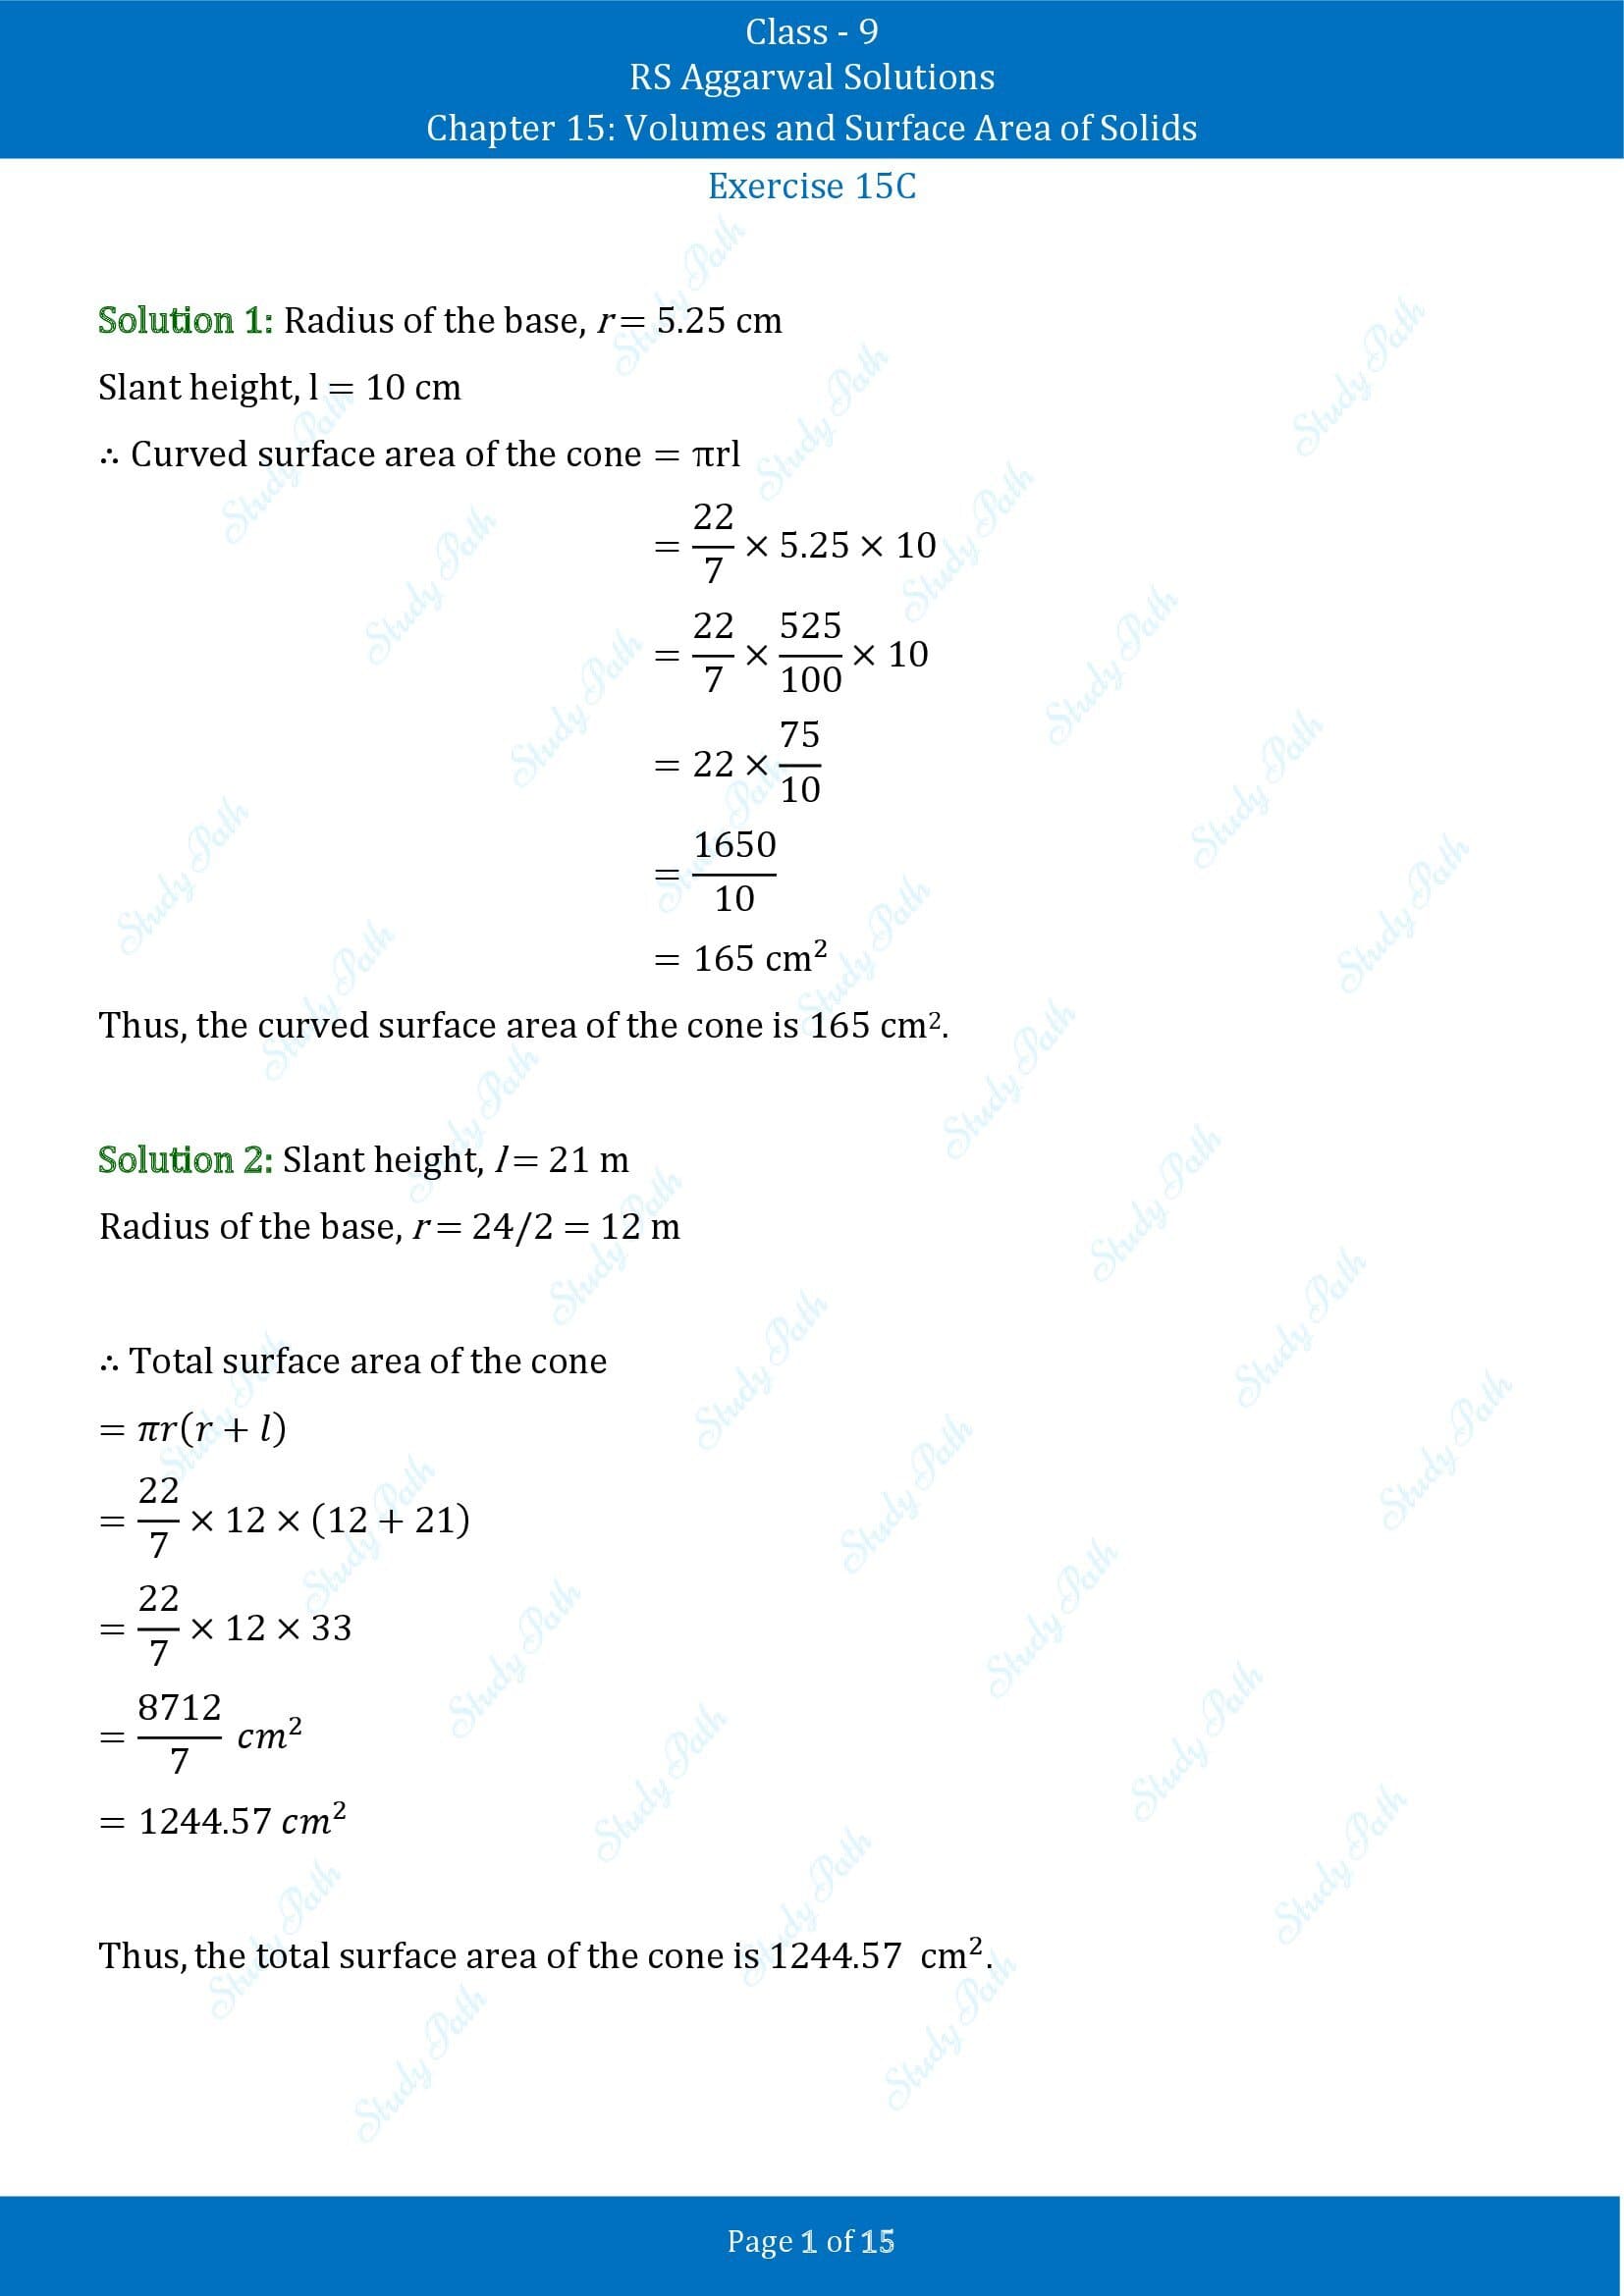 RS Aggarwal Solutions Class 9 Chapter 15 Volumes and Surface Area of Solids Exercise 15C 00001